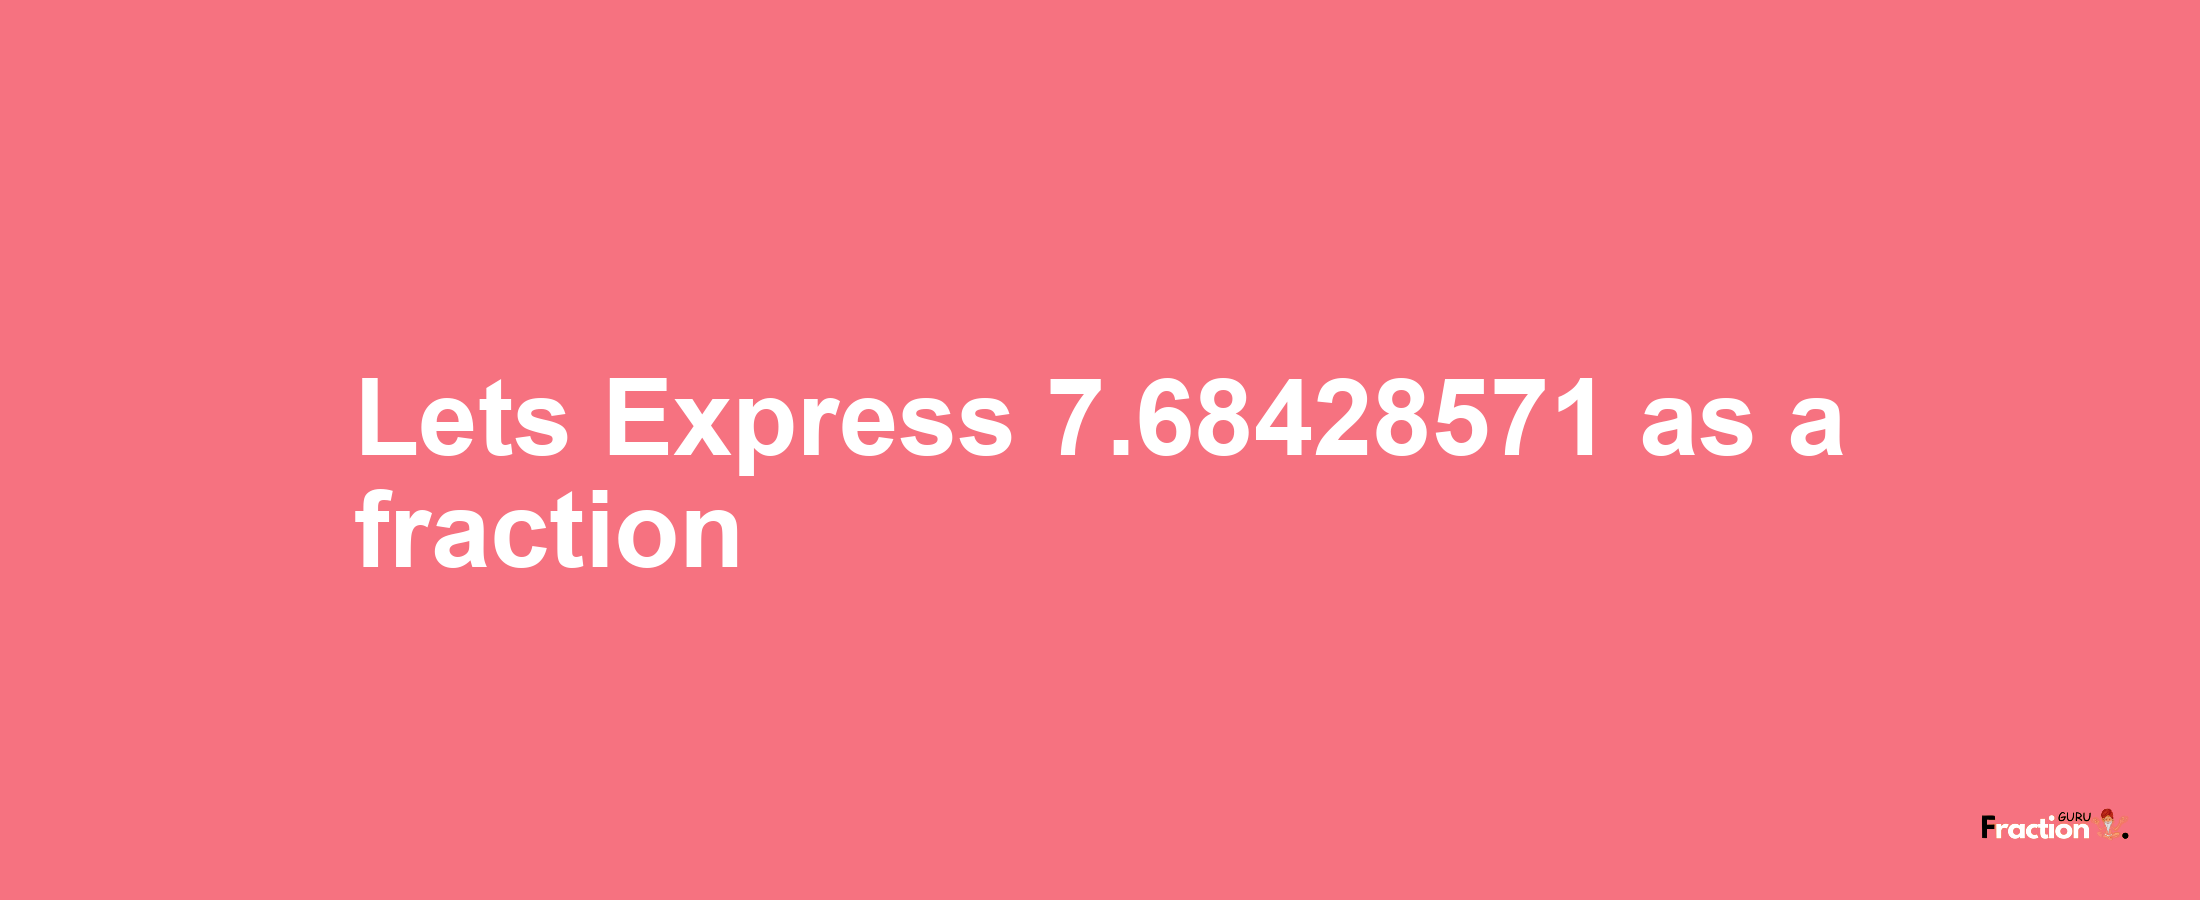 Lets Express 7.68428571 as afraction